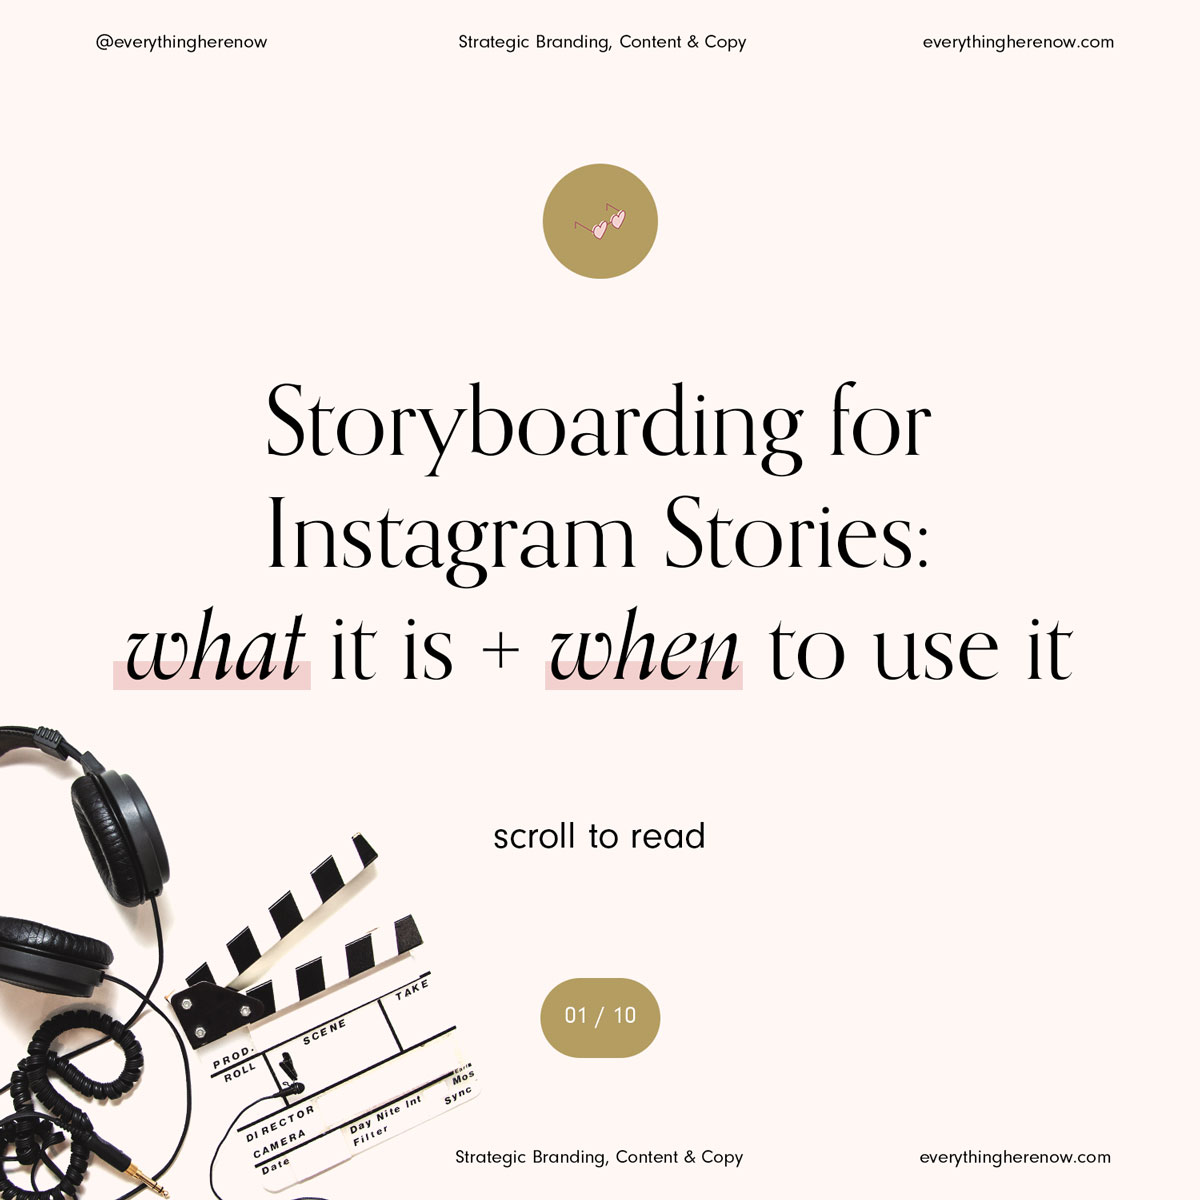 storyboarding-for-instagram-stories-what-it-is-and-when-to-use-it-by-everything-here-now-1